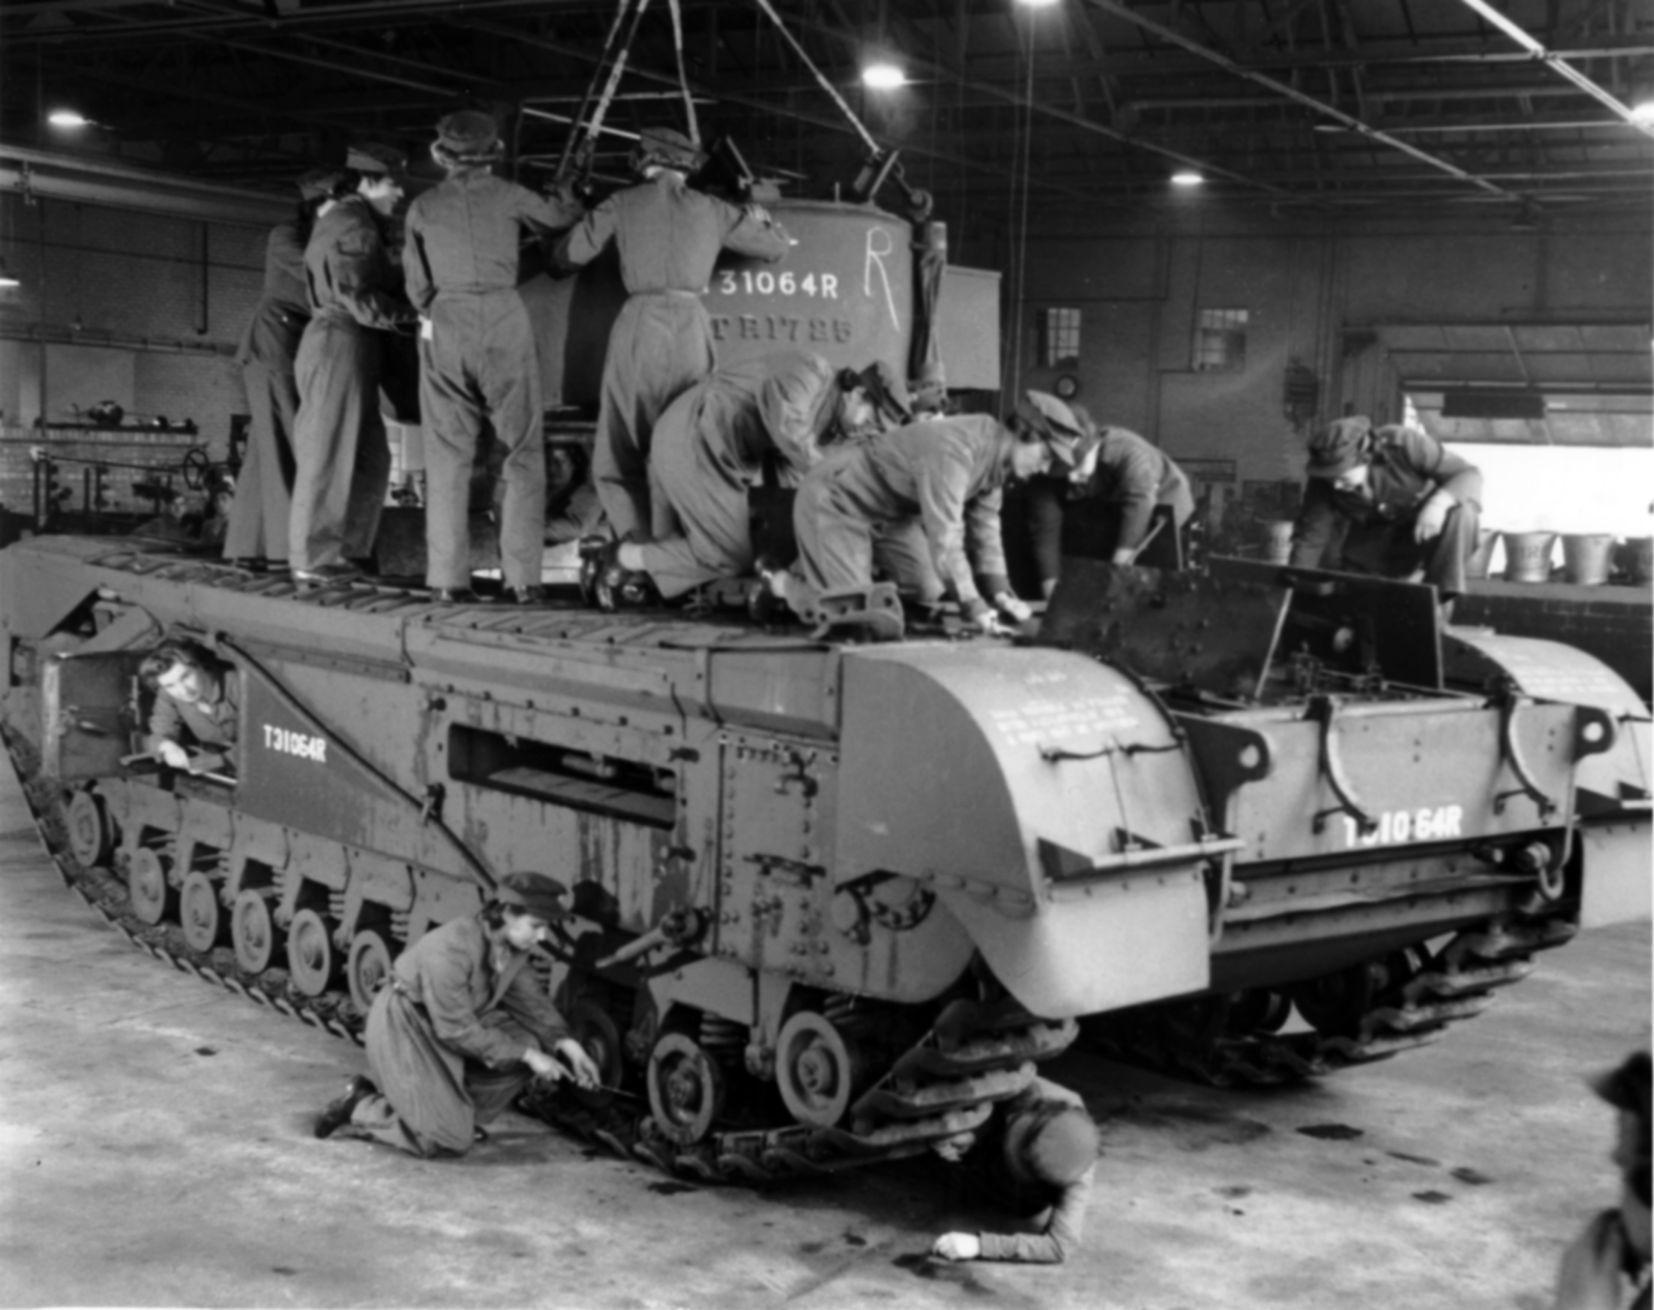 Women of the Auxiliary Territorial Service (ATS) work to guide a Churchill tank’s turret into position at a Royal Army Ordnance Corps depot.